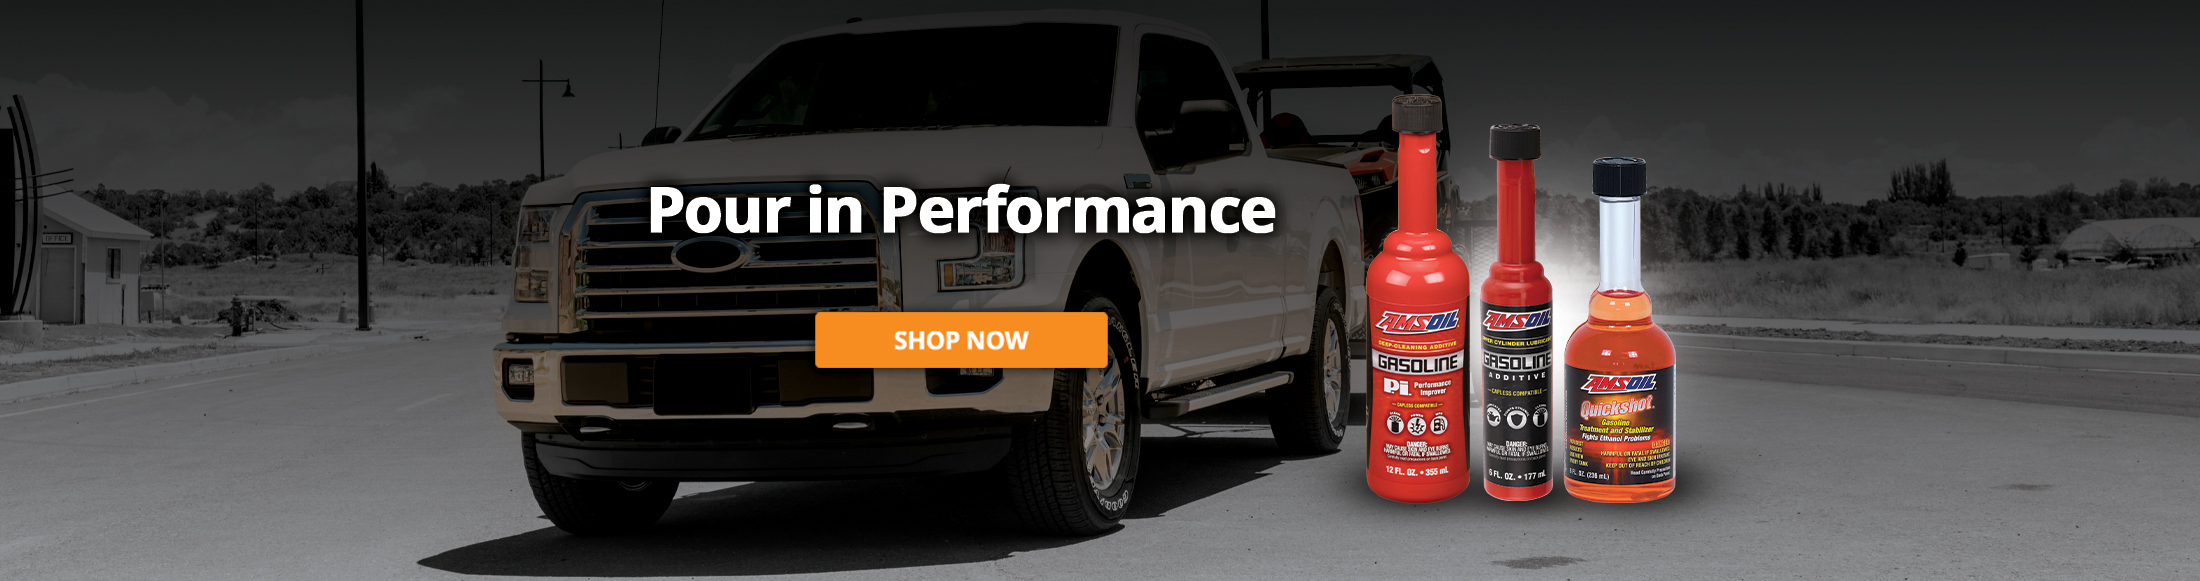 Pour in Performance. Shop Now.